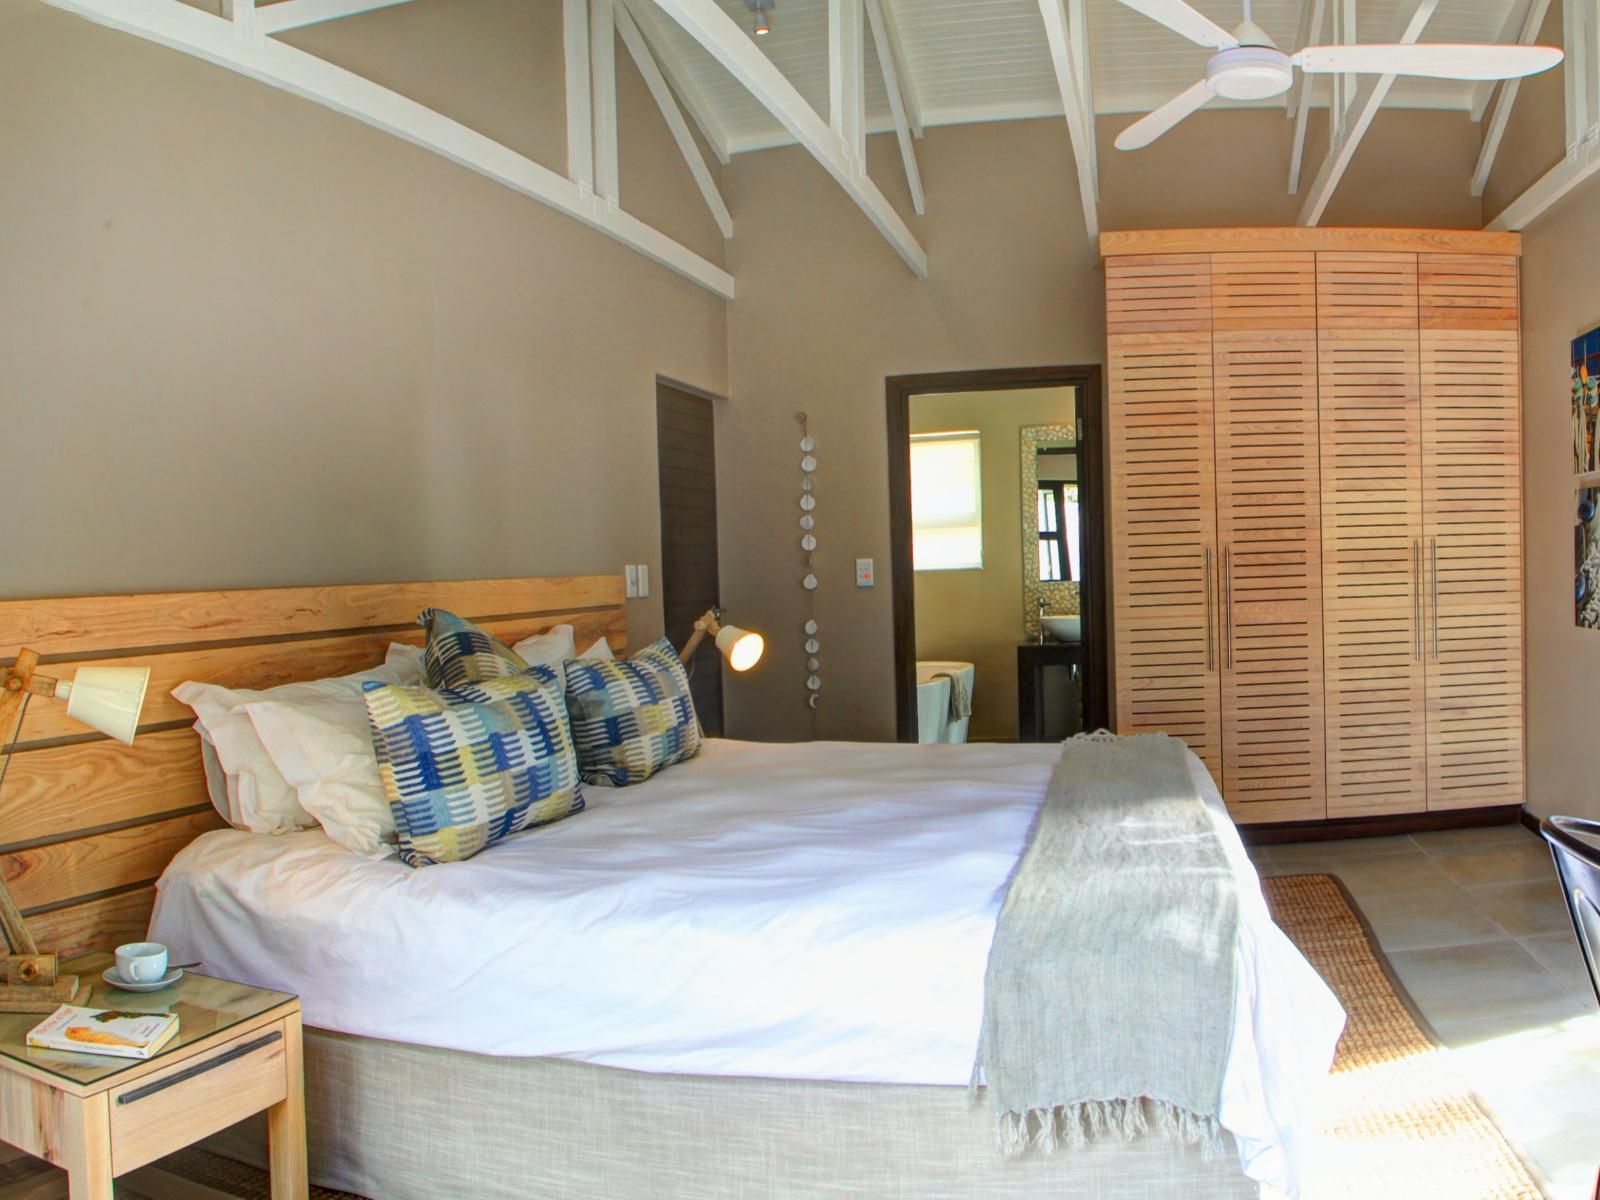 Scallop Lodge Plettenberg Bay Western Cape South Africa Bedroom